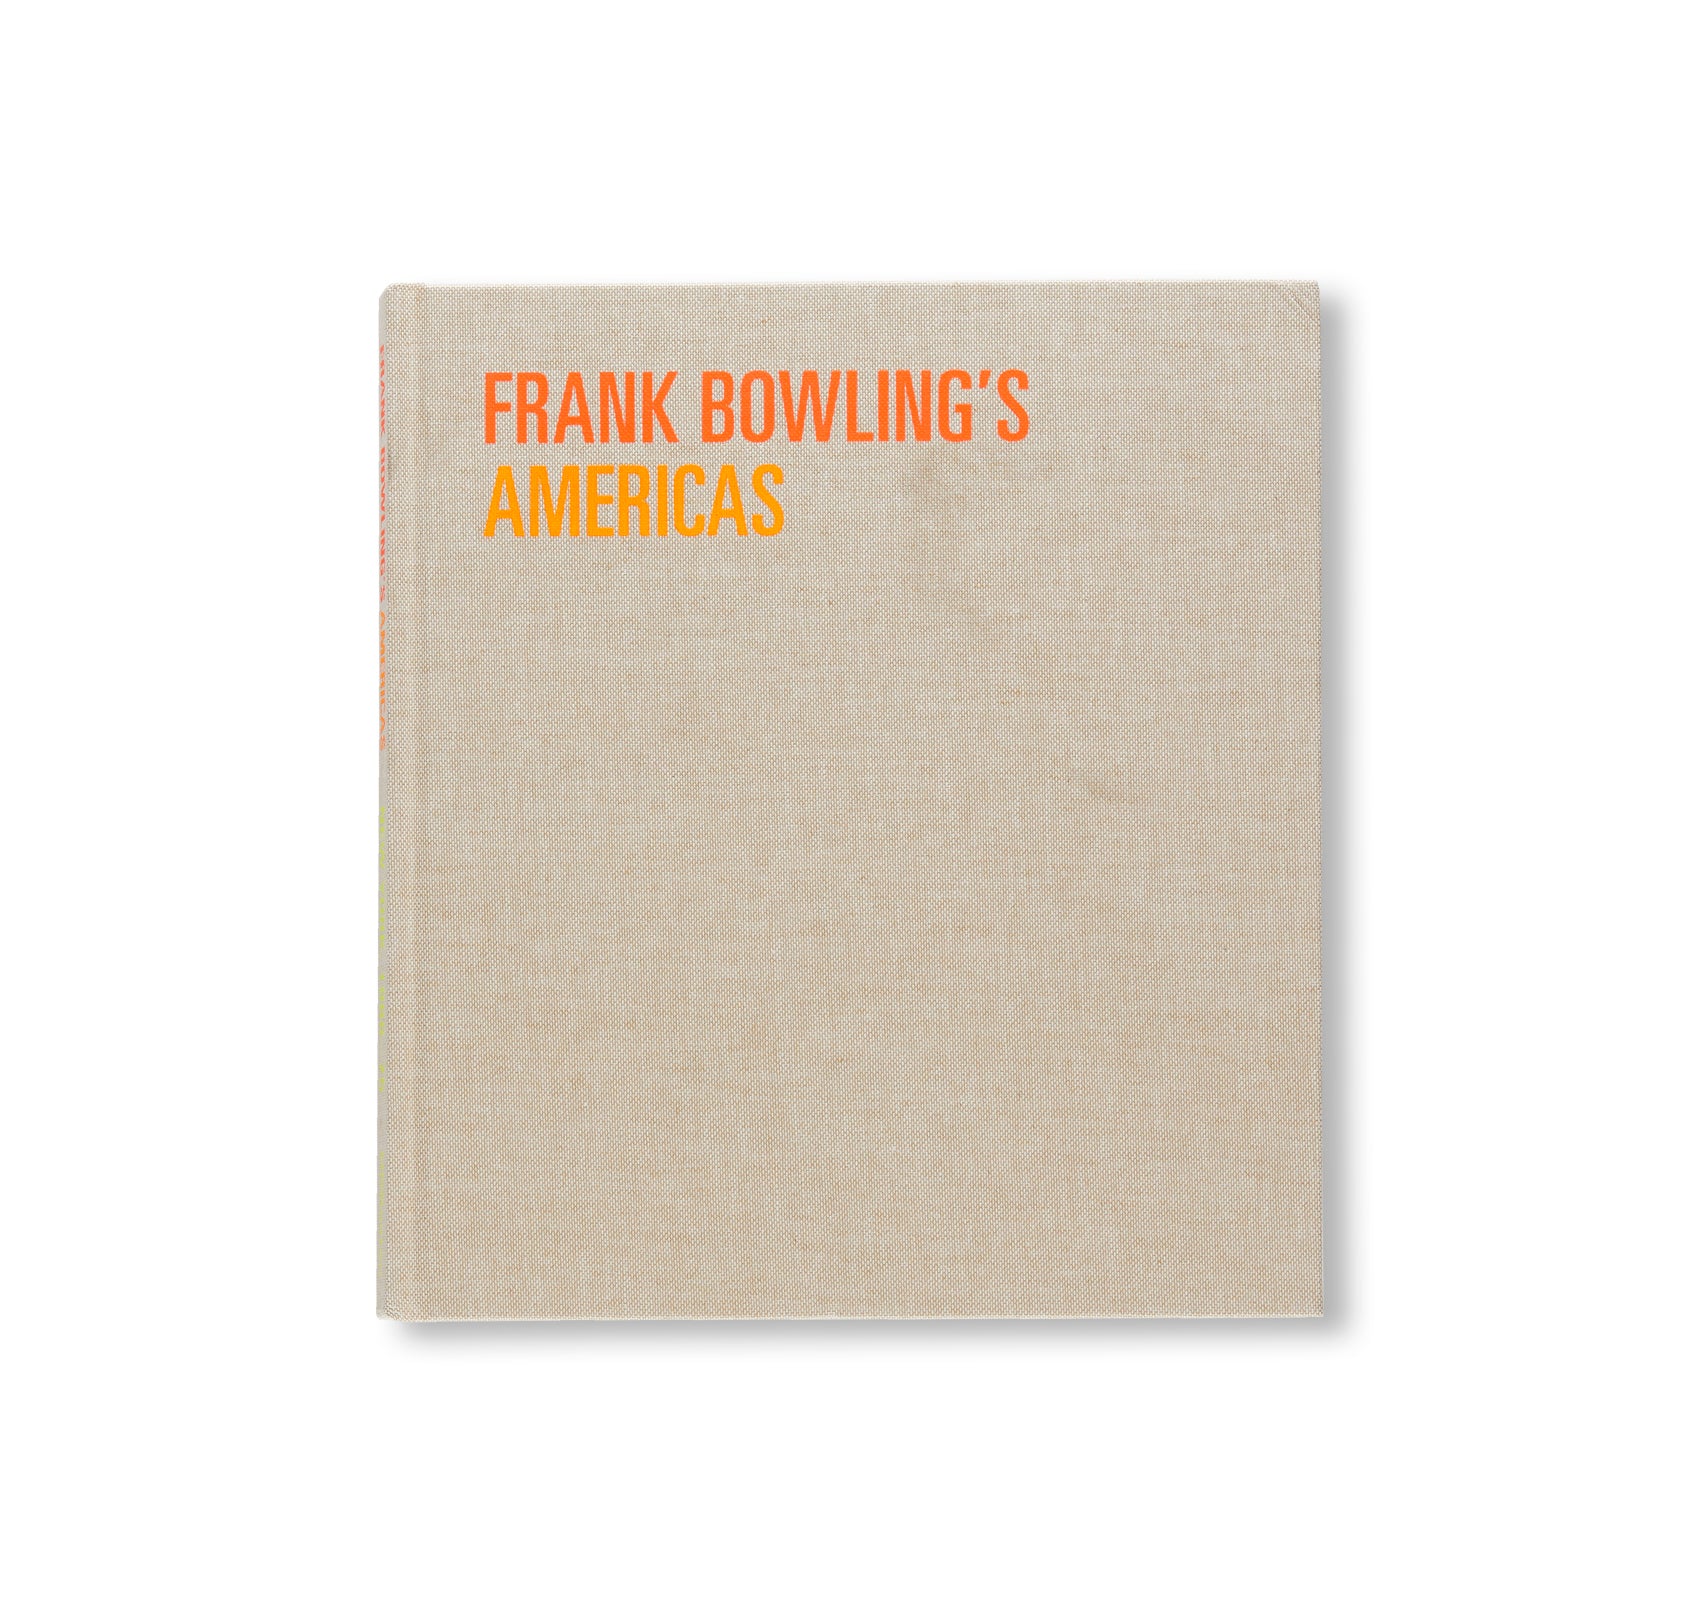 FRANK BOWLING'S AMERICAS by Frank Bowling